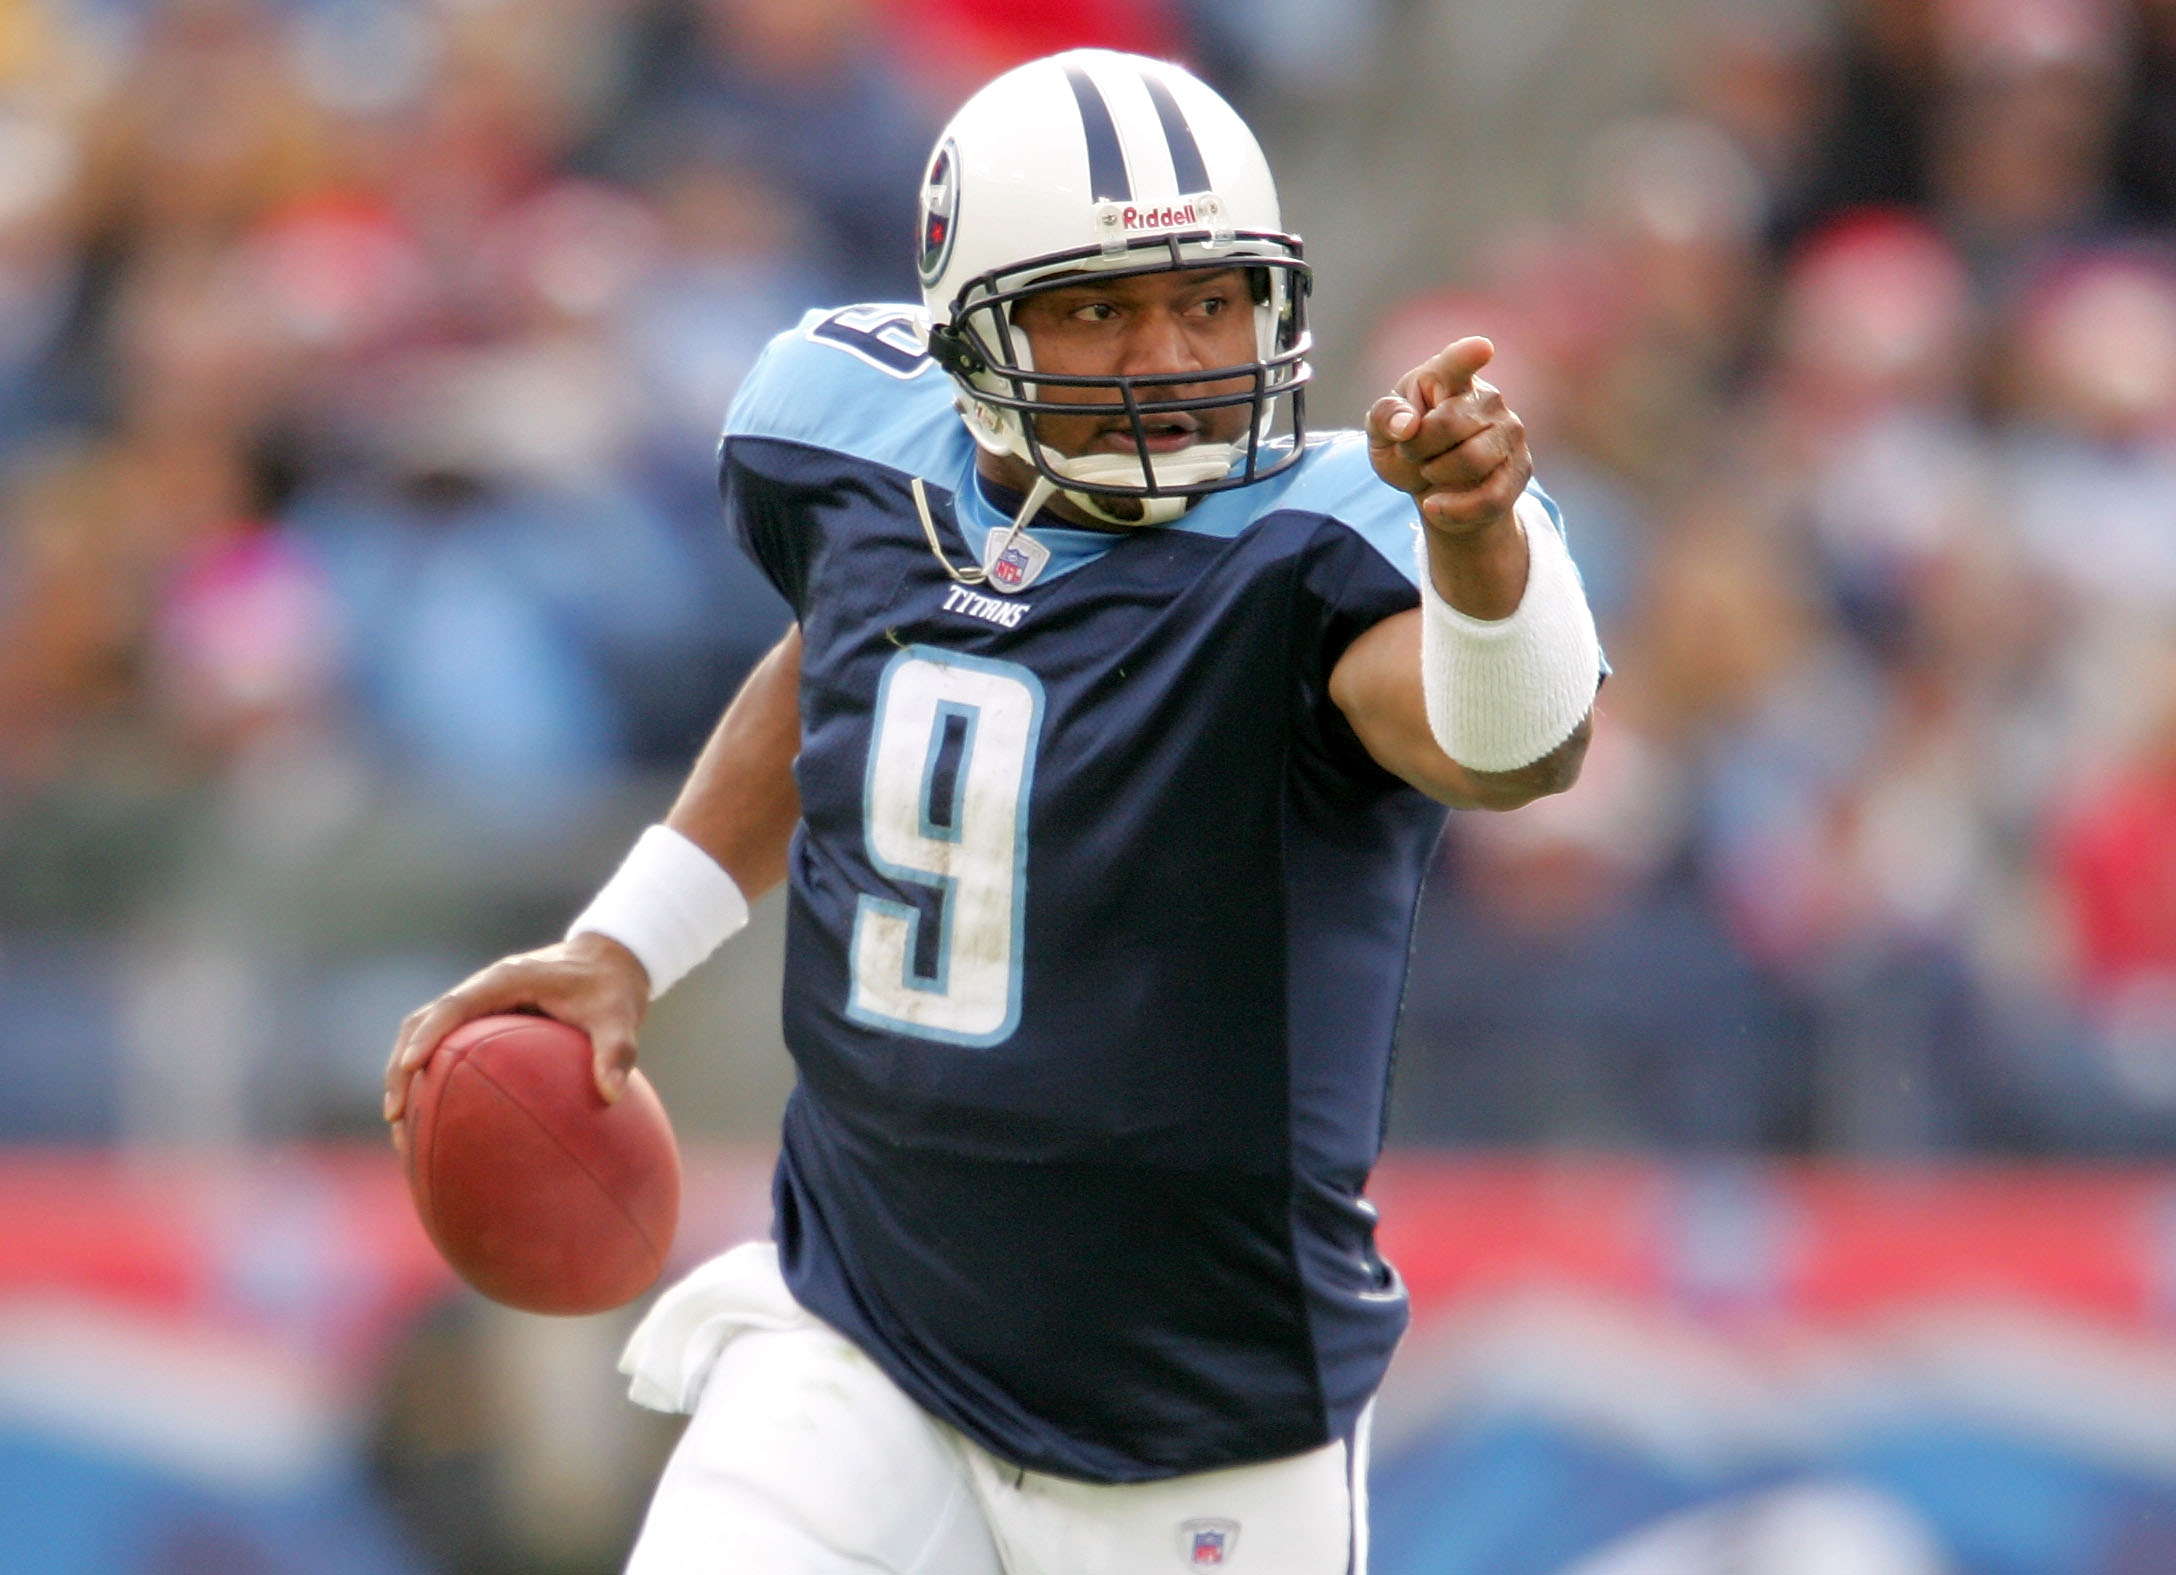 NASHVILLE - DECEMBER 18: Steve McNair #9 of the Tennessee Titans scrambles out of the pocket aganst the Tennessee Titans December 18, 2005 at The Coliseum in Nashville, Tennessee. (Photo by Matthew Stockman/Getty Images)